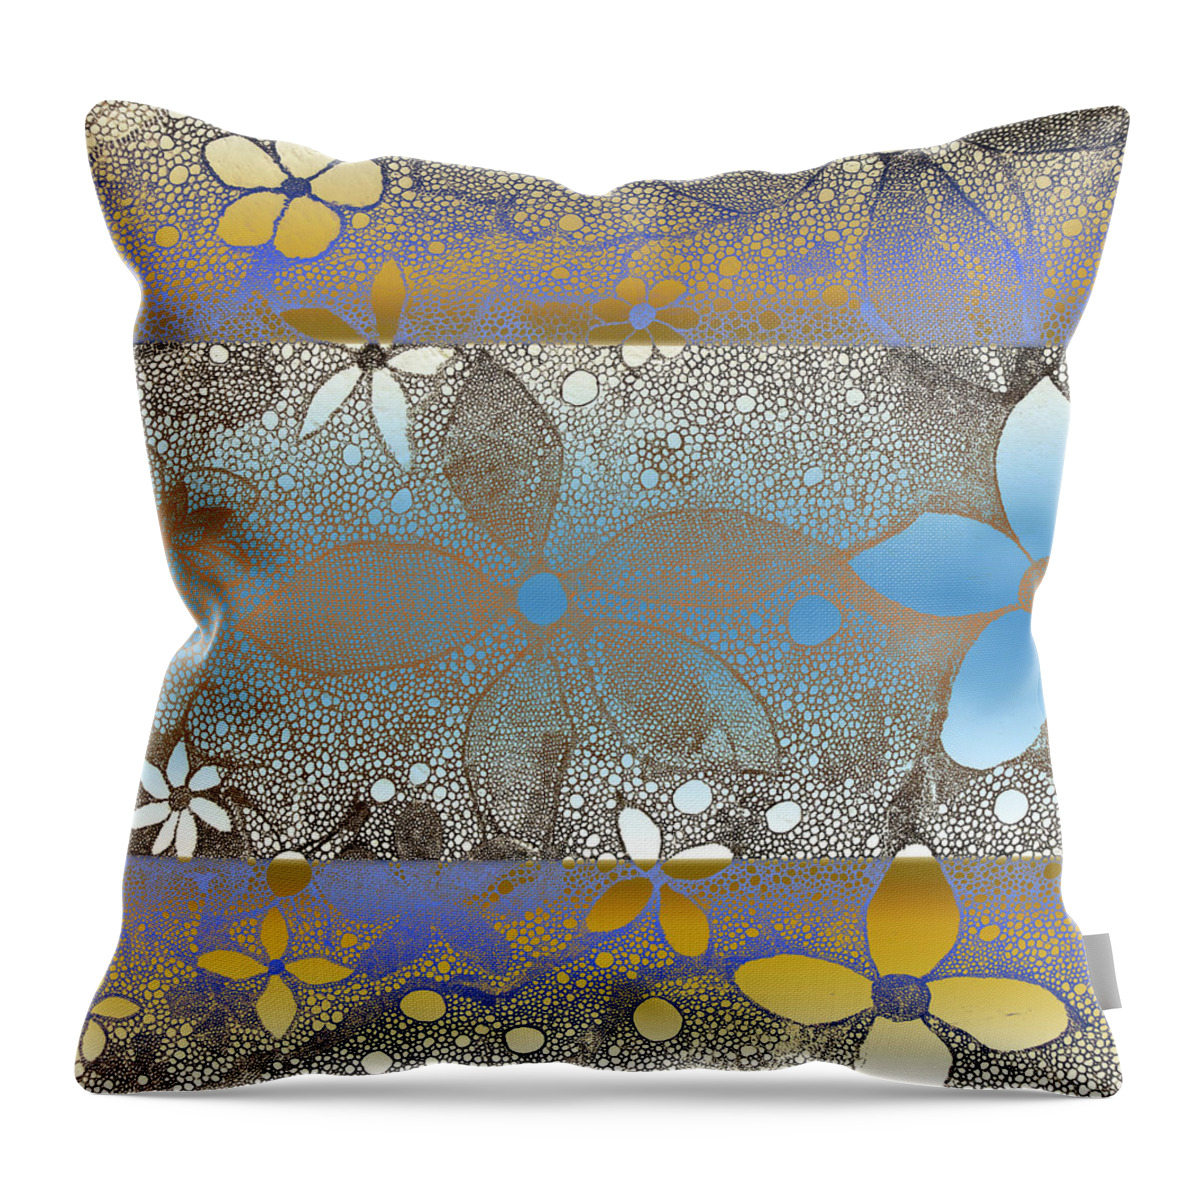 Flower Throw Pillow featuring the mixed media Blue Antique Flowers In Lace by Melinda Firestone-White